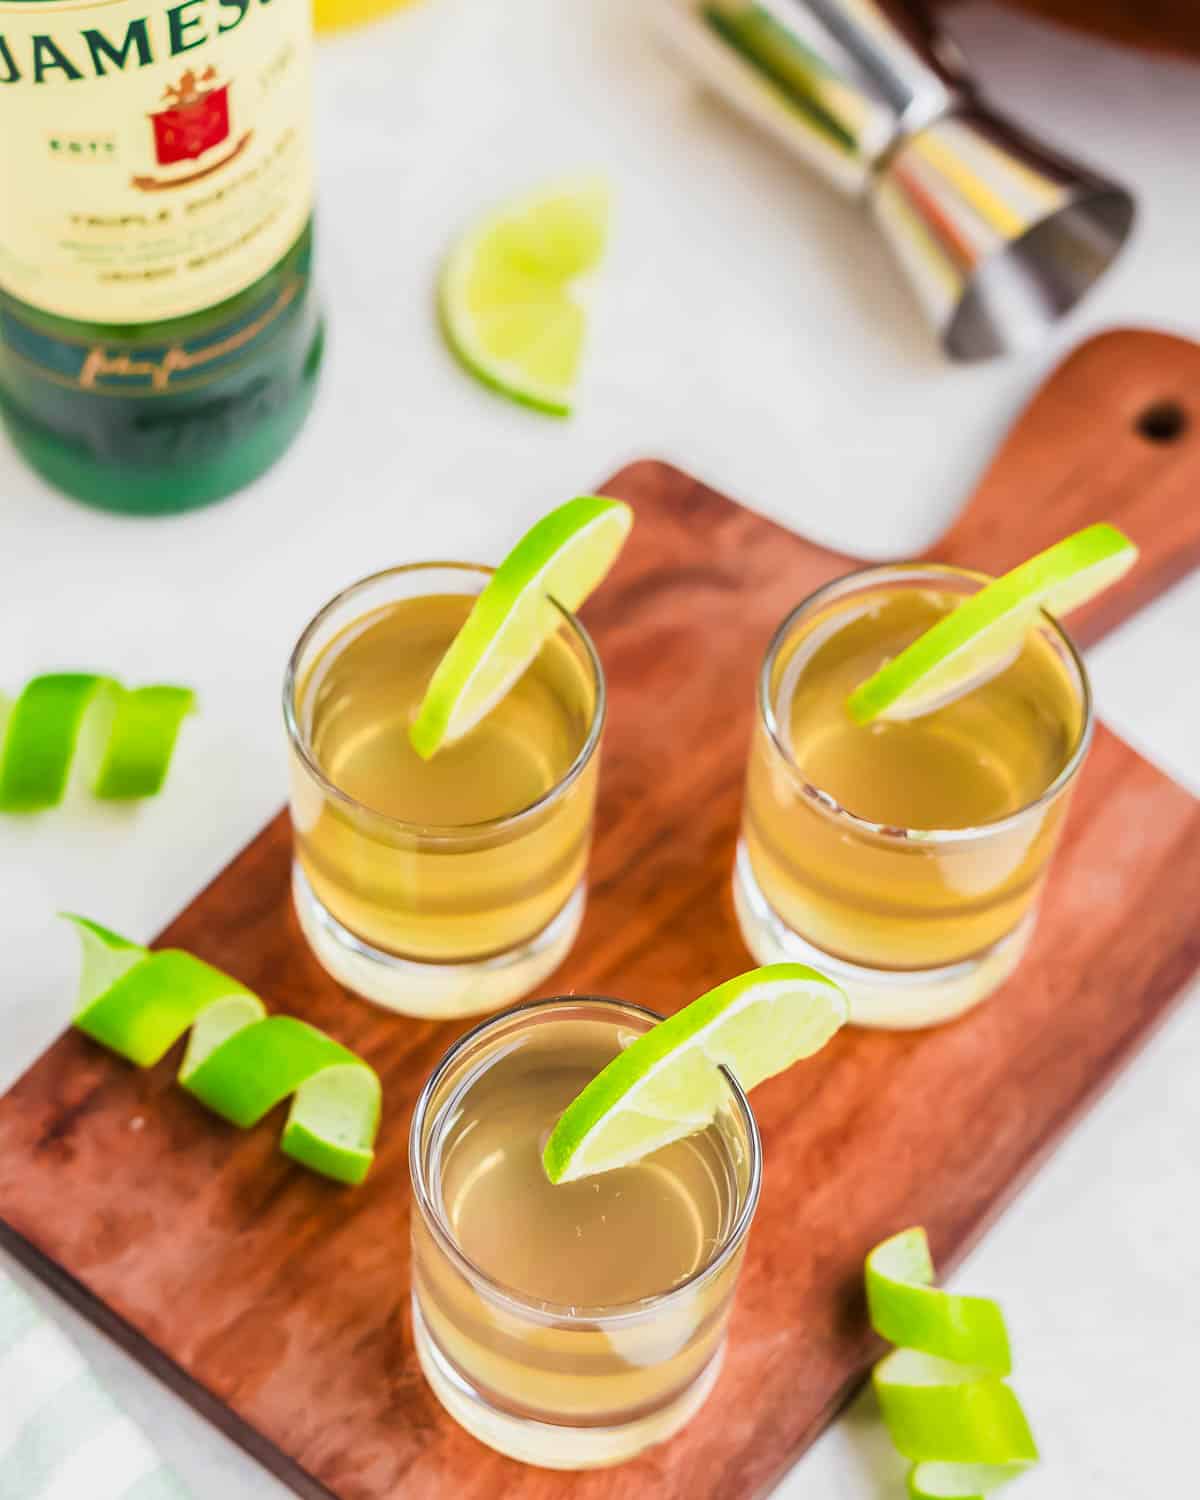 Overhead shot of green tea shots with Jameson in the background.